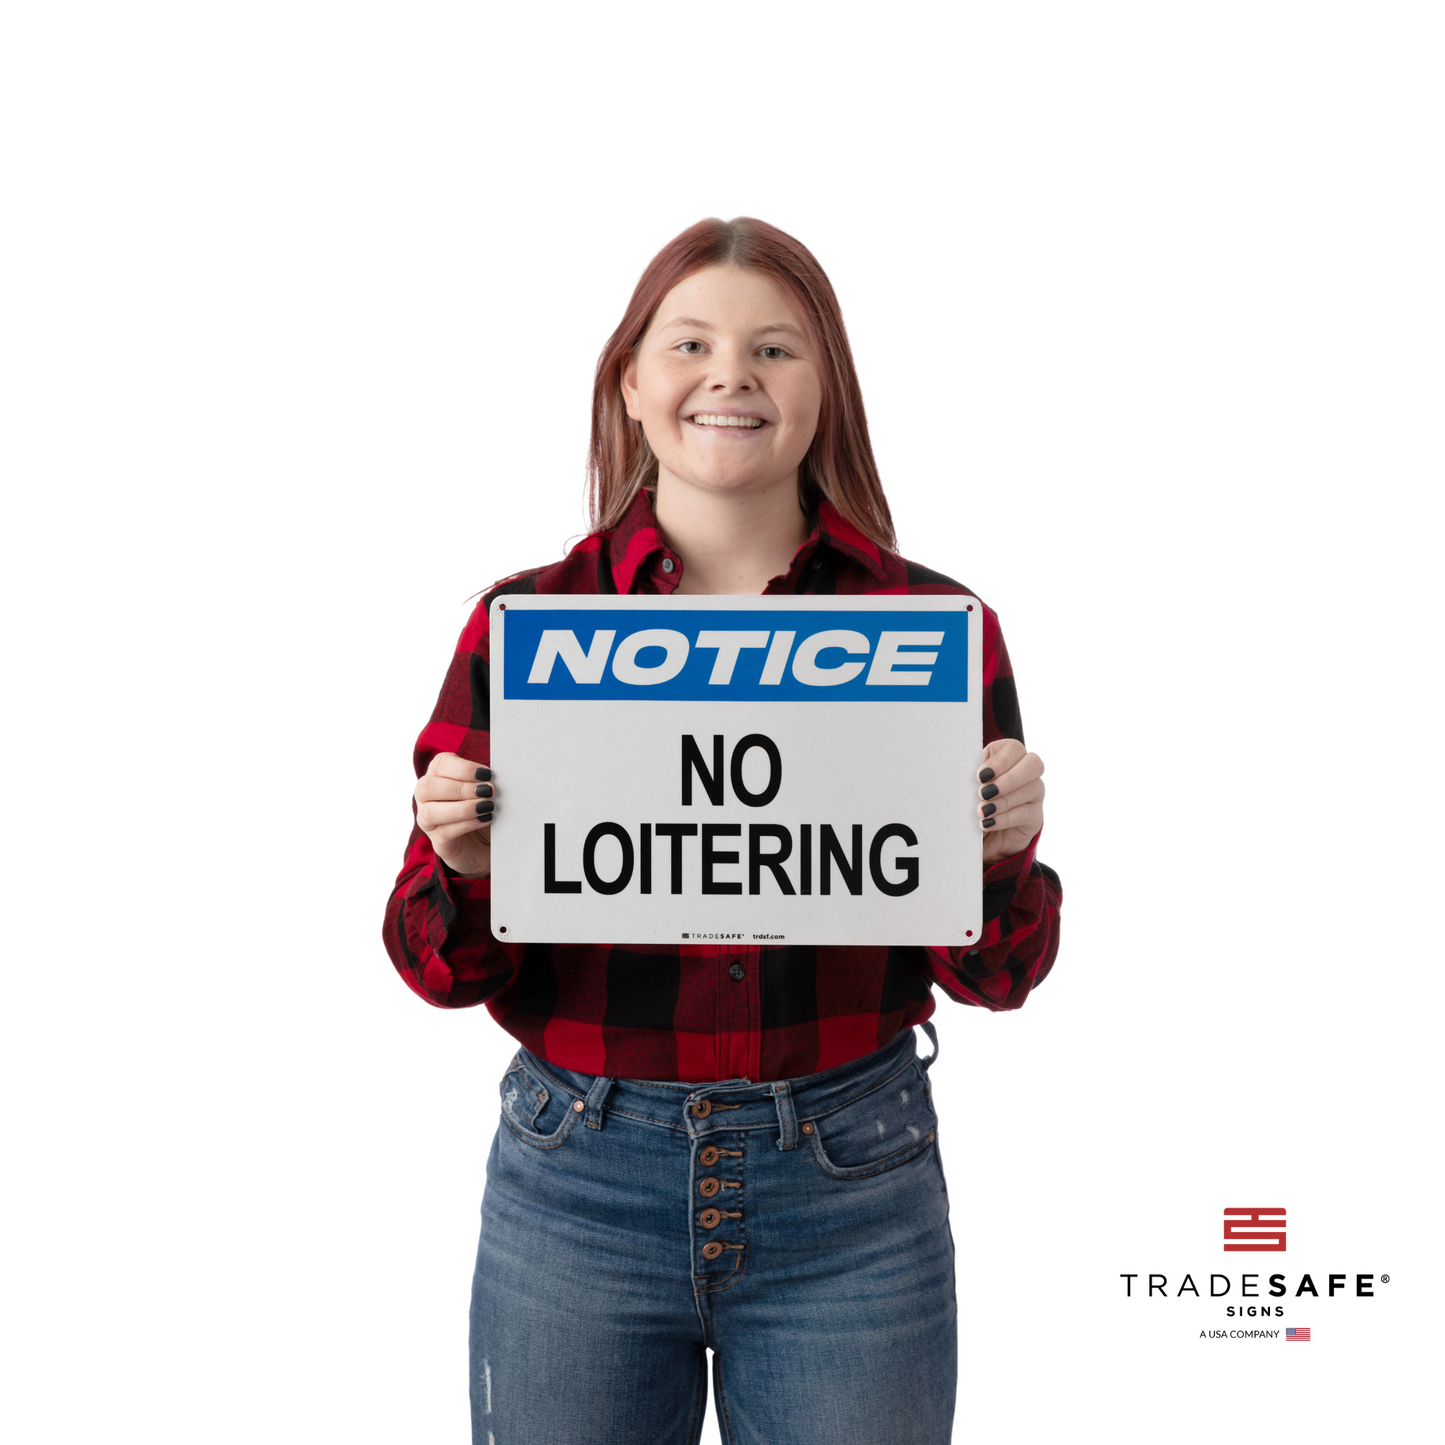 a person holding a notice sign with the text "no loitering"